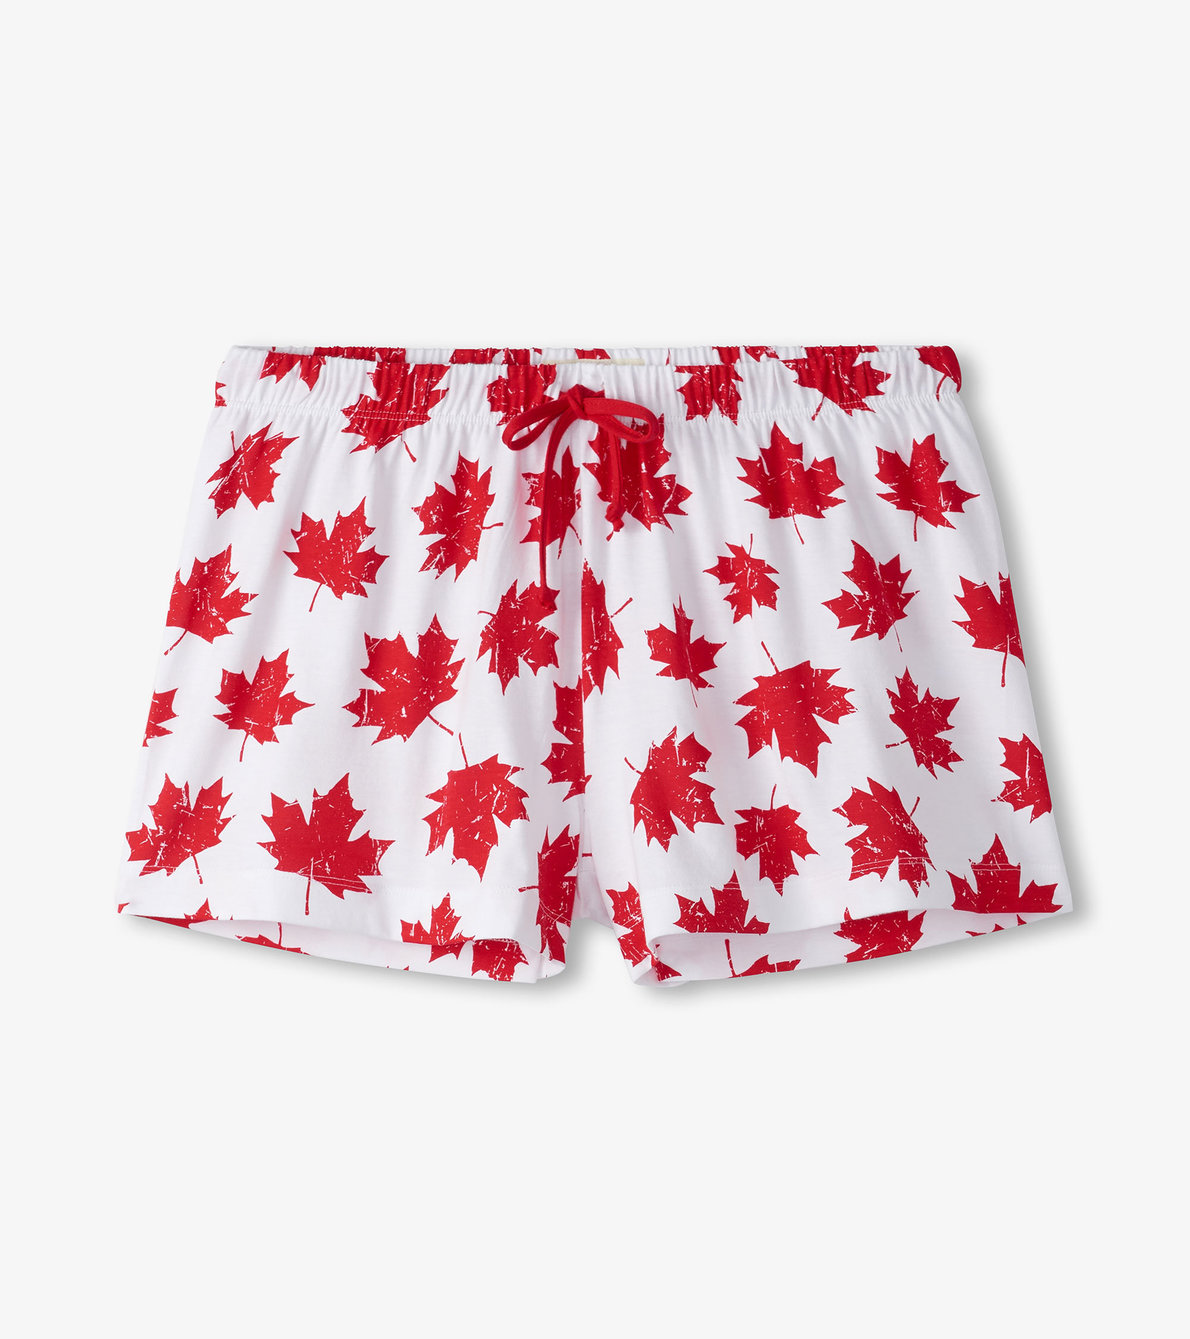 View larger image of Canada Womens Sleep Shorts